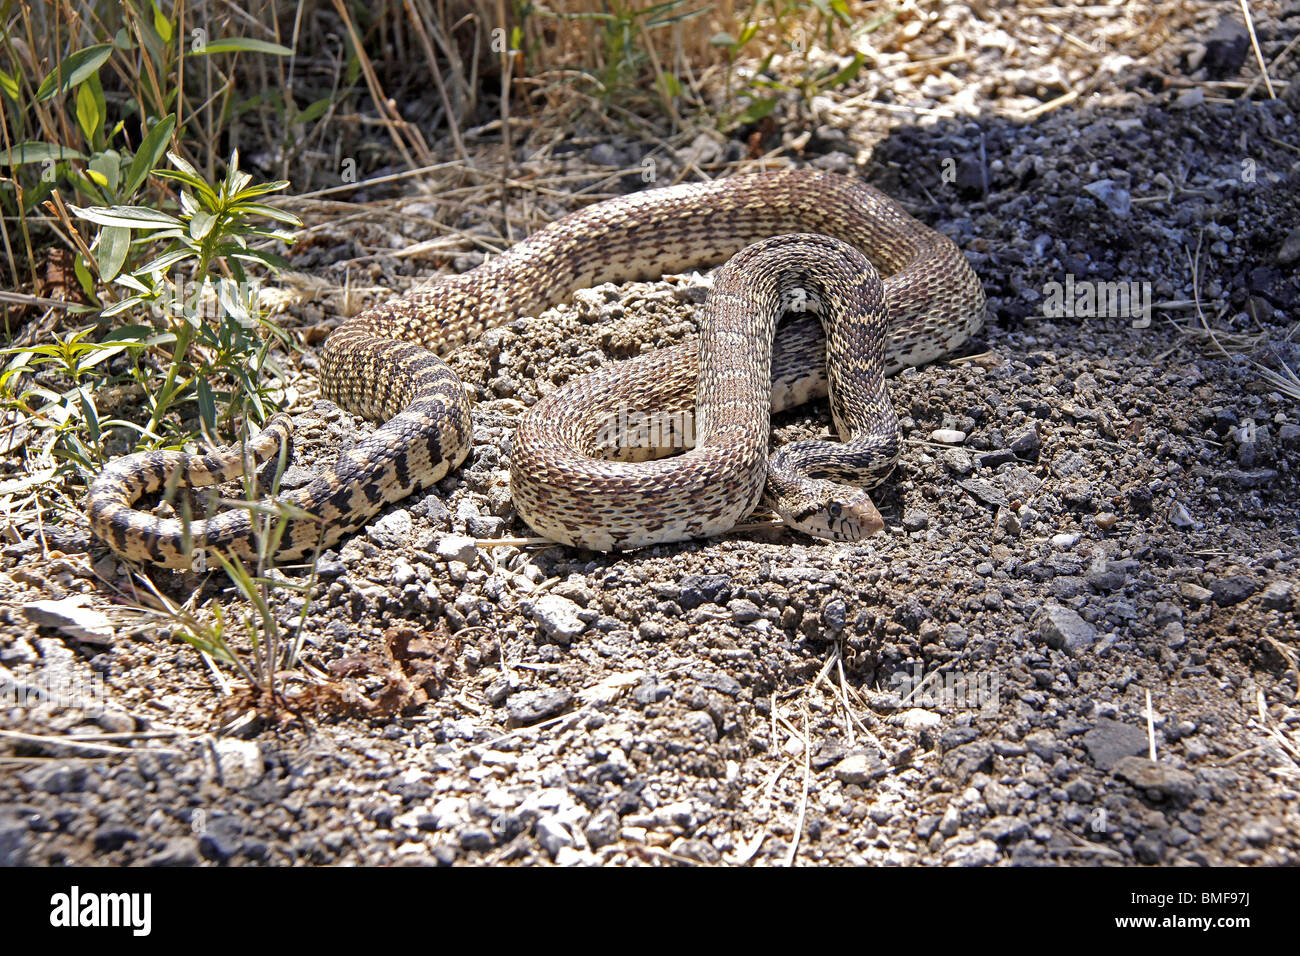 Close up of an agitated Bull Snake Stock Photo